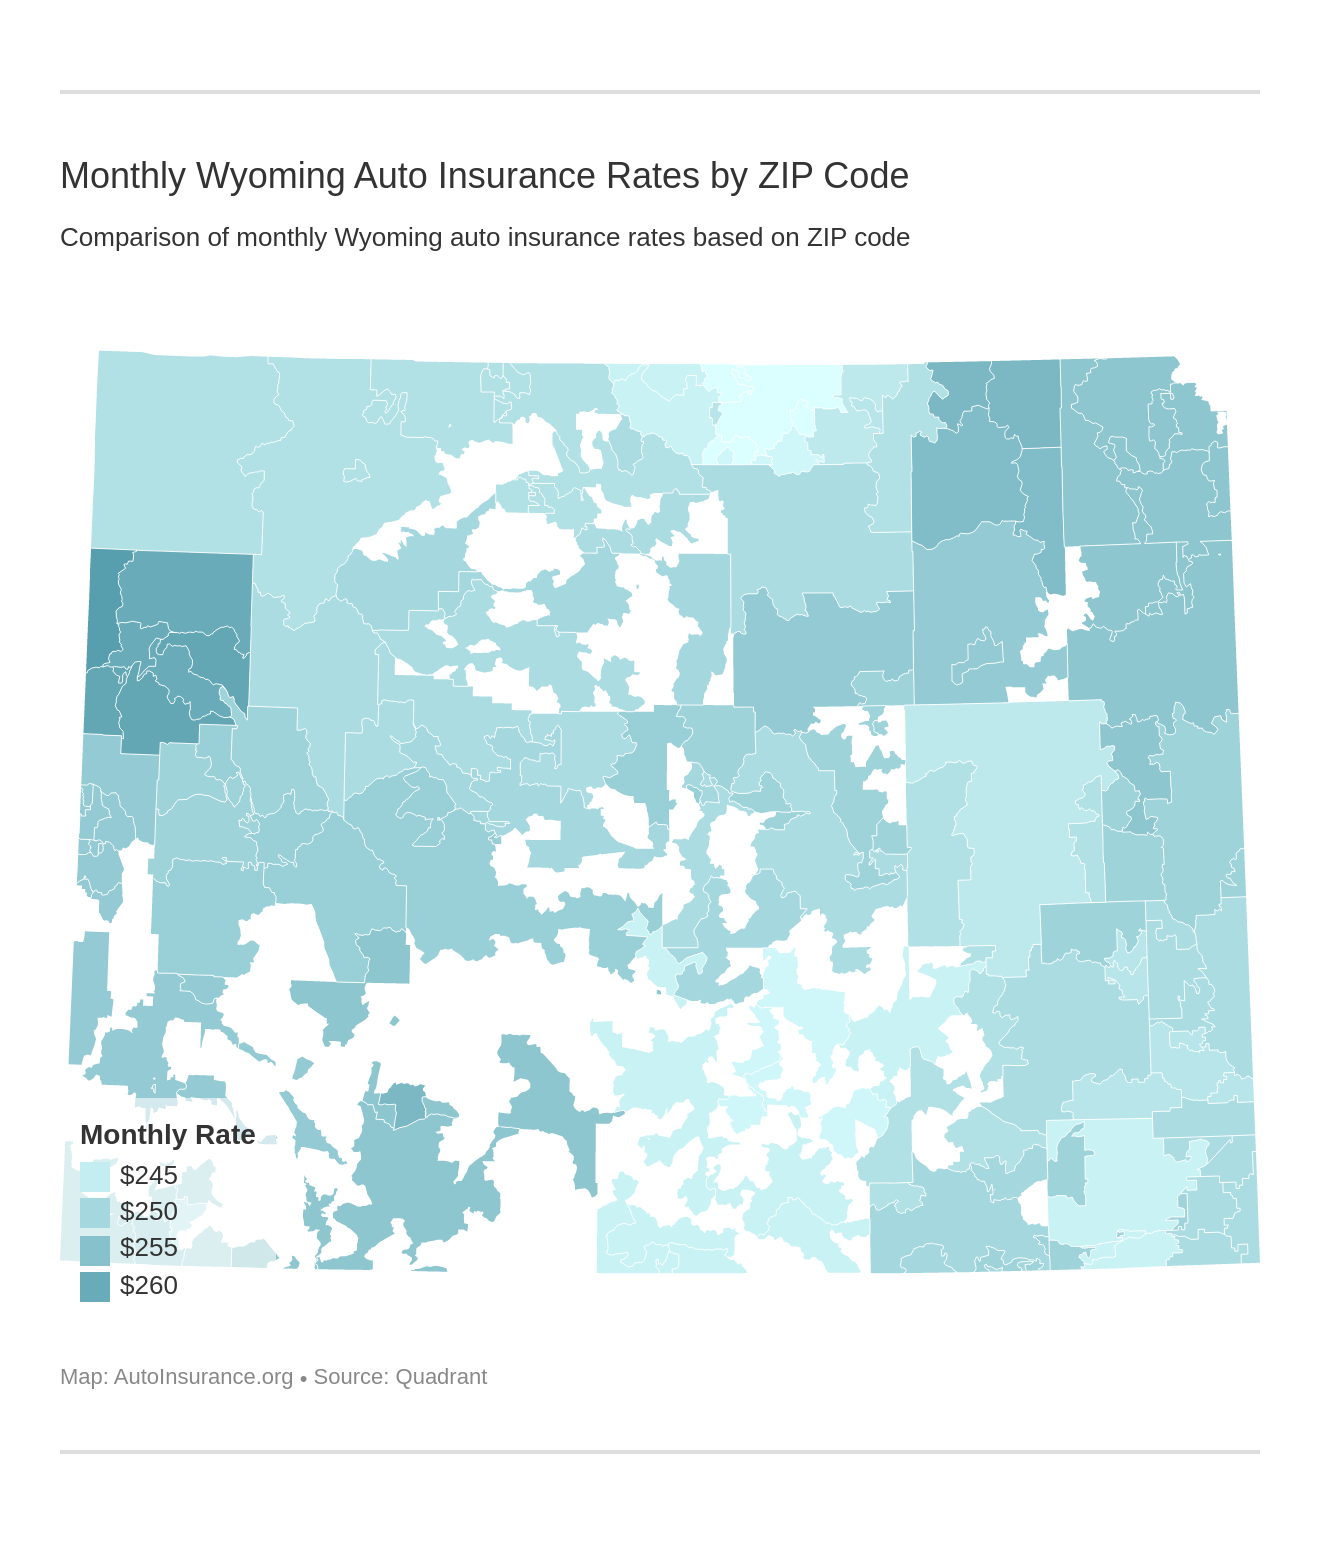 Monthly Wyoming Auto Insurance Rates by ZIP Code